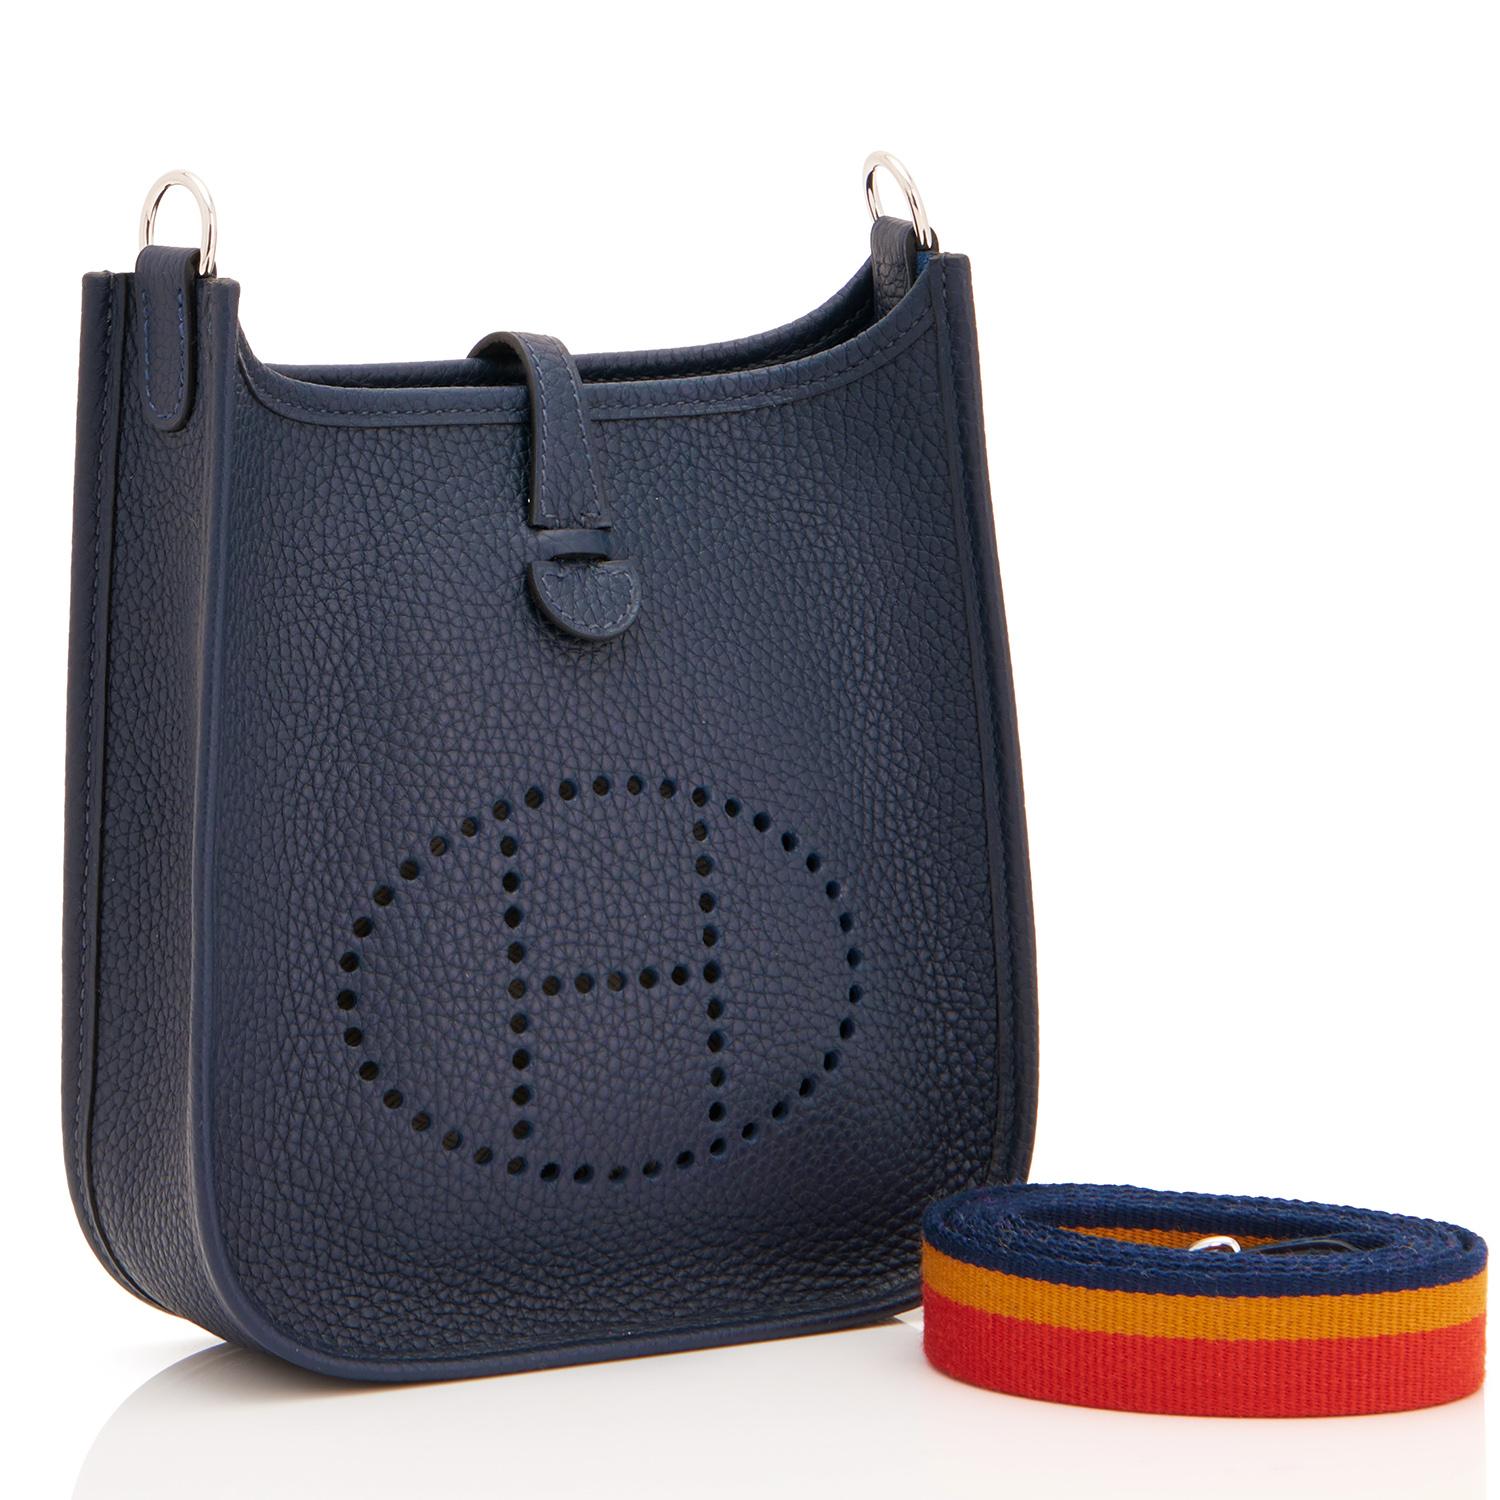 Hermes Blue Nuit Navy Evelyne TPM Clemence Shoulder Cross Body Messenger Bag
Brand New in Box. Store Fresh. Pristine Condition.
Perfect gift! Coming in full set with shoulder strap, Hermes sleepers, and Hermes box. 
This Blue Nuit Evelyne Tres